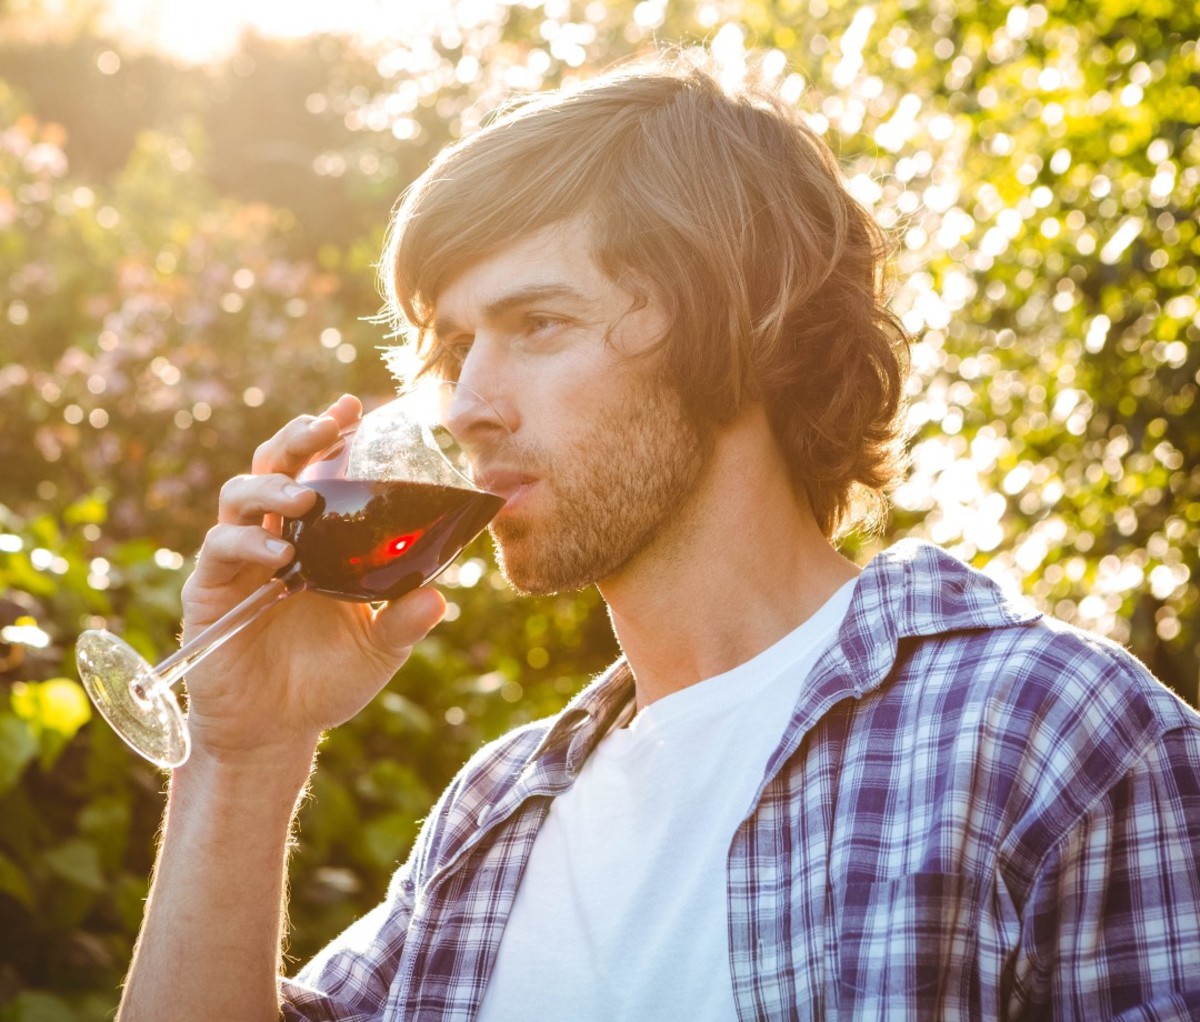 Man drinking a glass of wine.